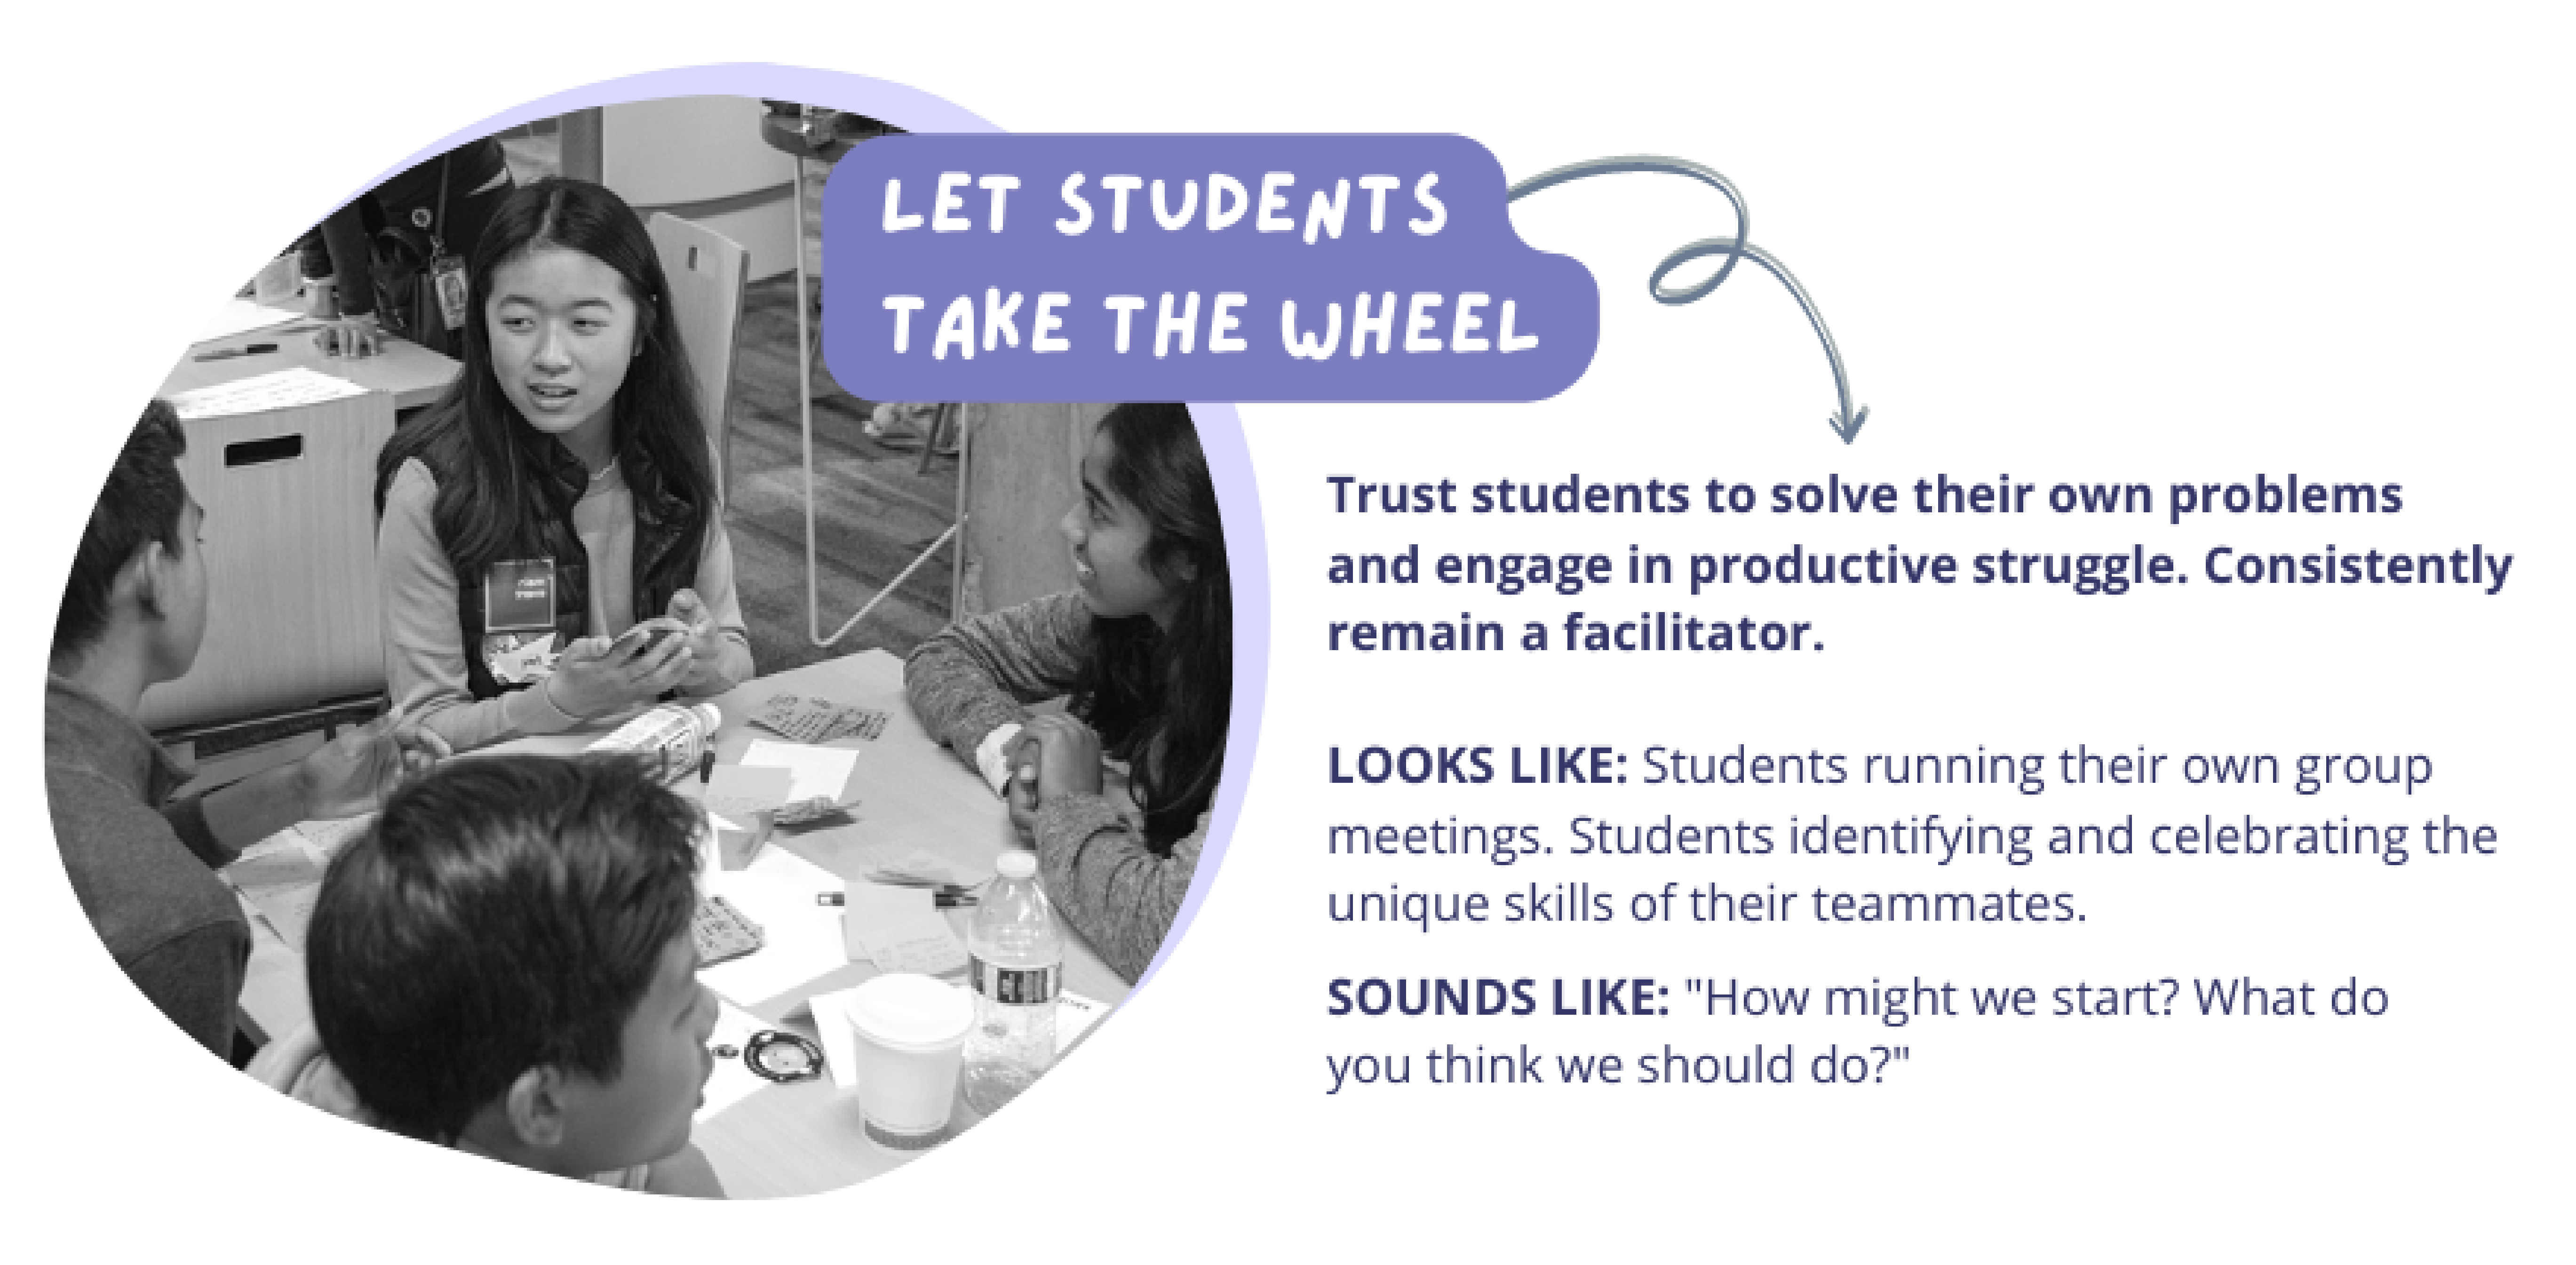 Let Students Take the Wheel: Trust students to solve their own problems  and engage in productive struggle. Consistently remain a facilitator.